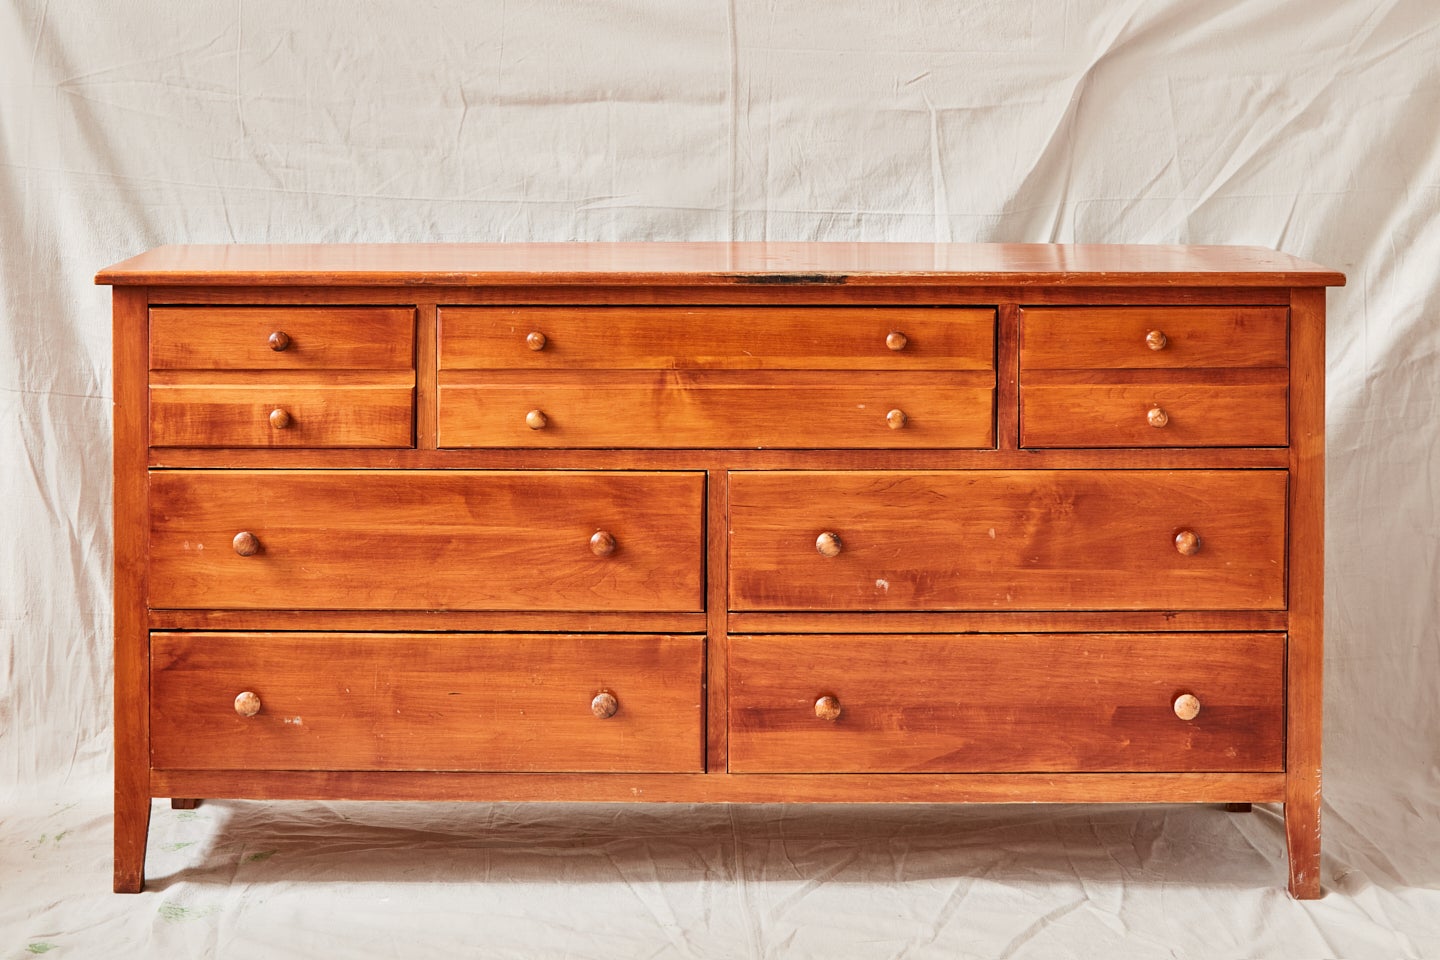 wooden dresser with drawers